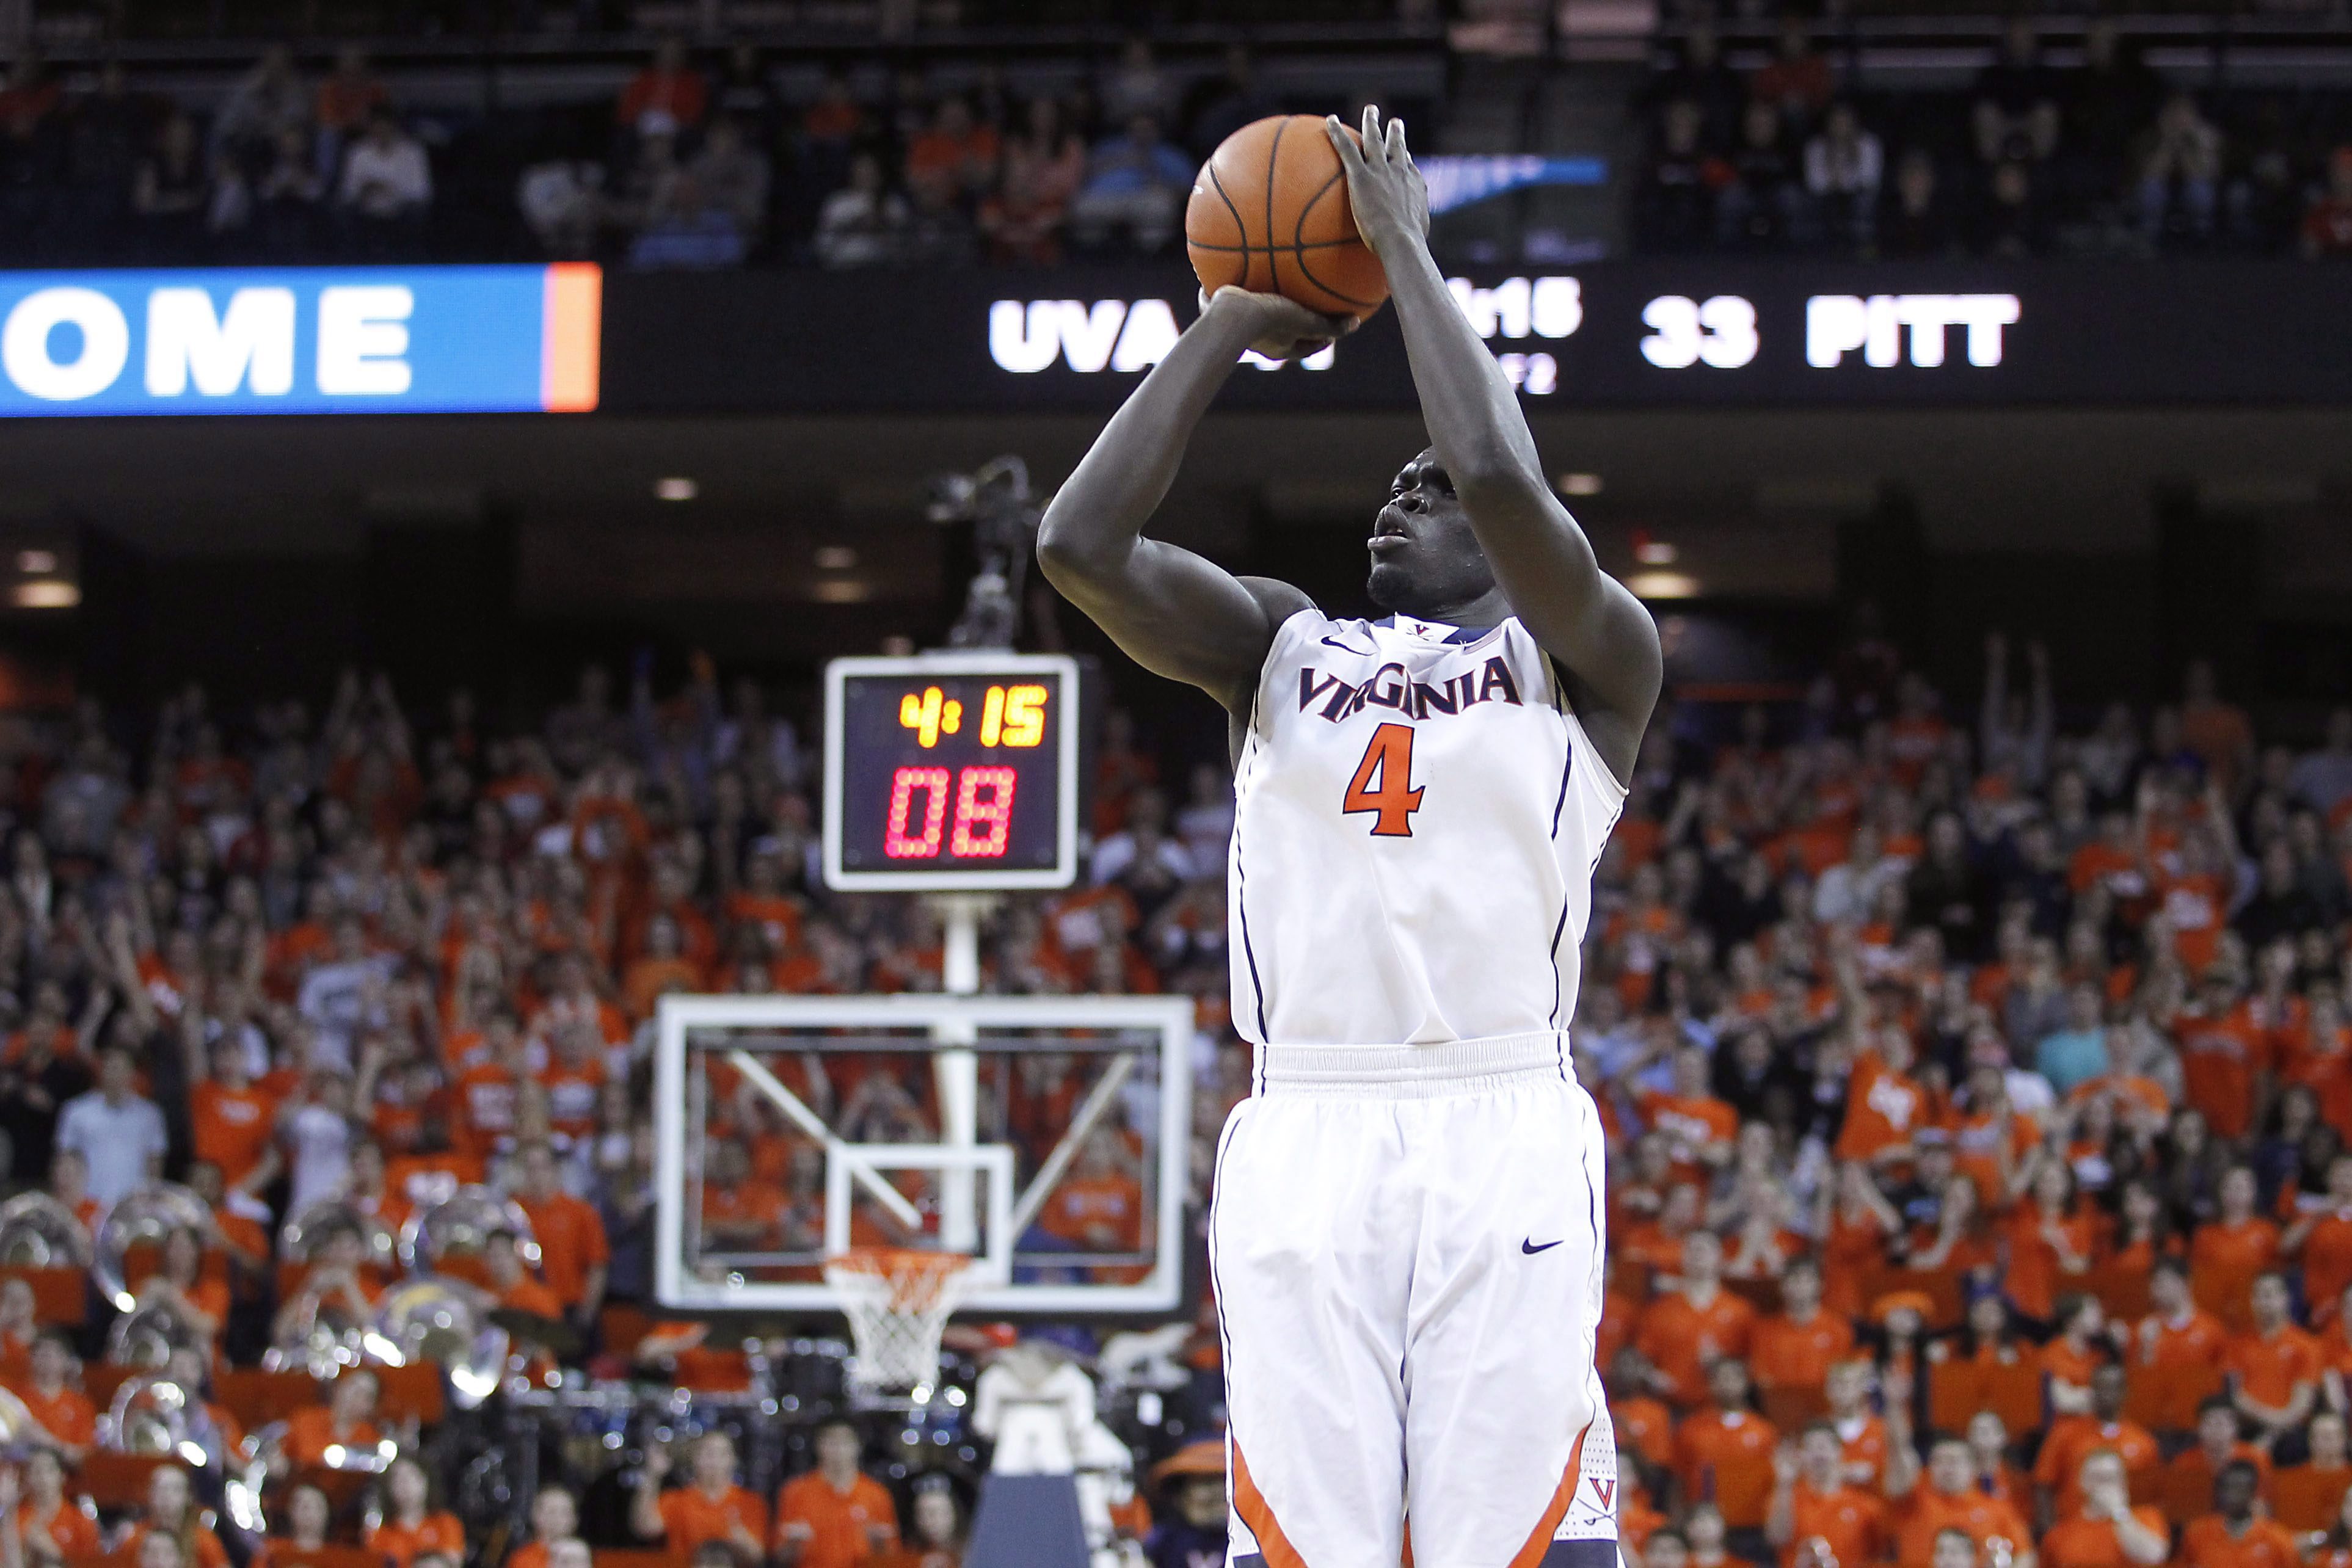 Virginia guard Marial Shayok (4) shoots during the second half of an NCAA college basketball game against Pittsburgh in Charlottesville, Va., on Monday, Feb. 16, 2015. Virginia won 61-49. (AP Photo/Ryan M. Kelly)